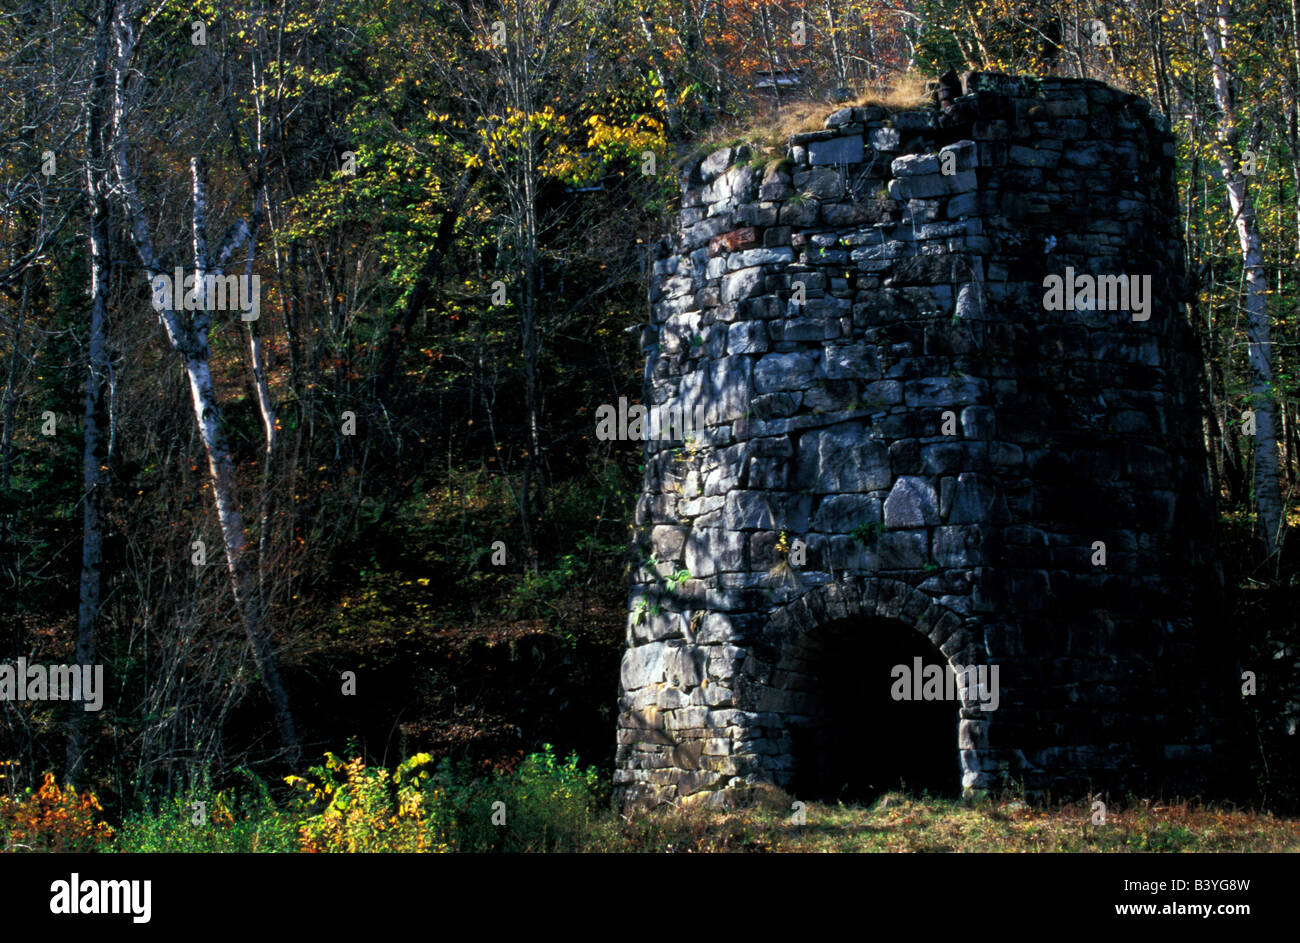 North America, United States, New Hampshire. A stone furnace in the woods. Stock Photo